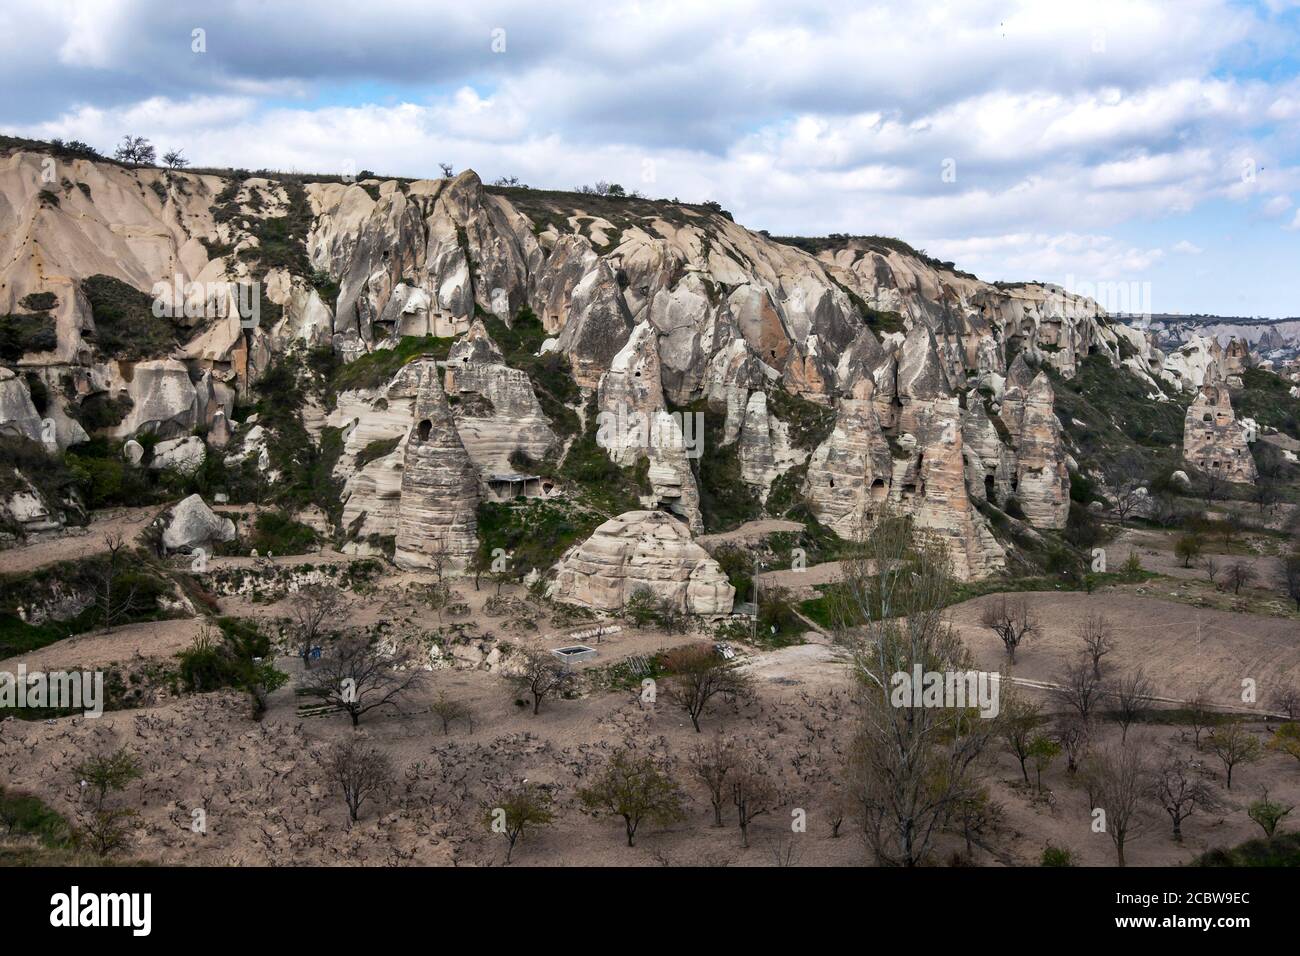 A hill side covered with volcanic rock formations known as fairy chimneys near the Open Air Museum at Goreme in the Cappadocia region of Turkey. Stock Photo